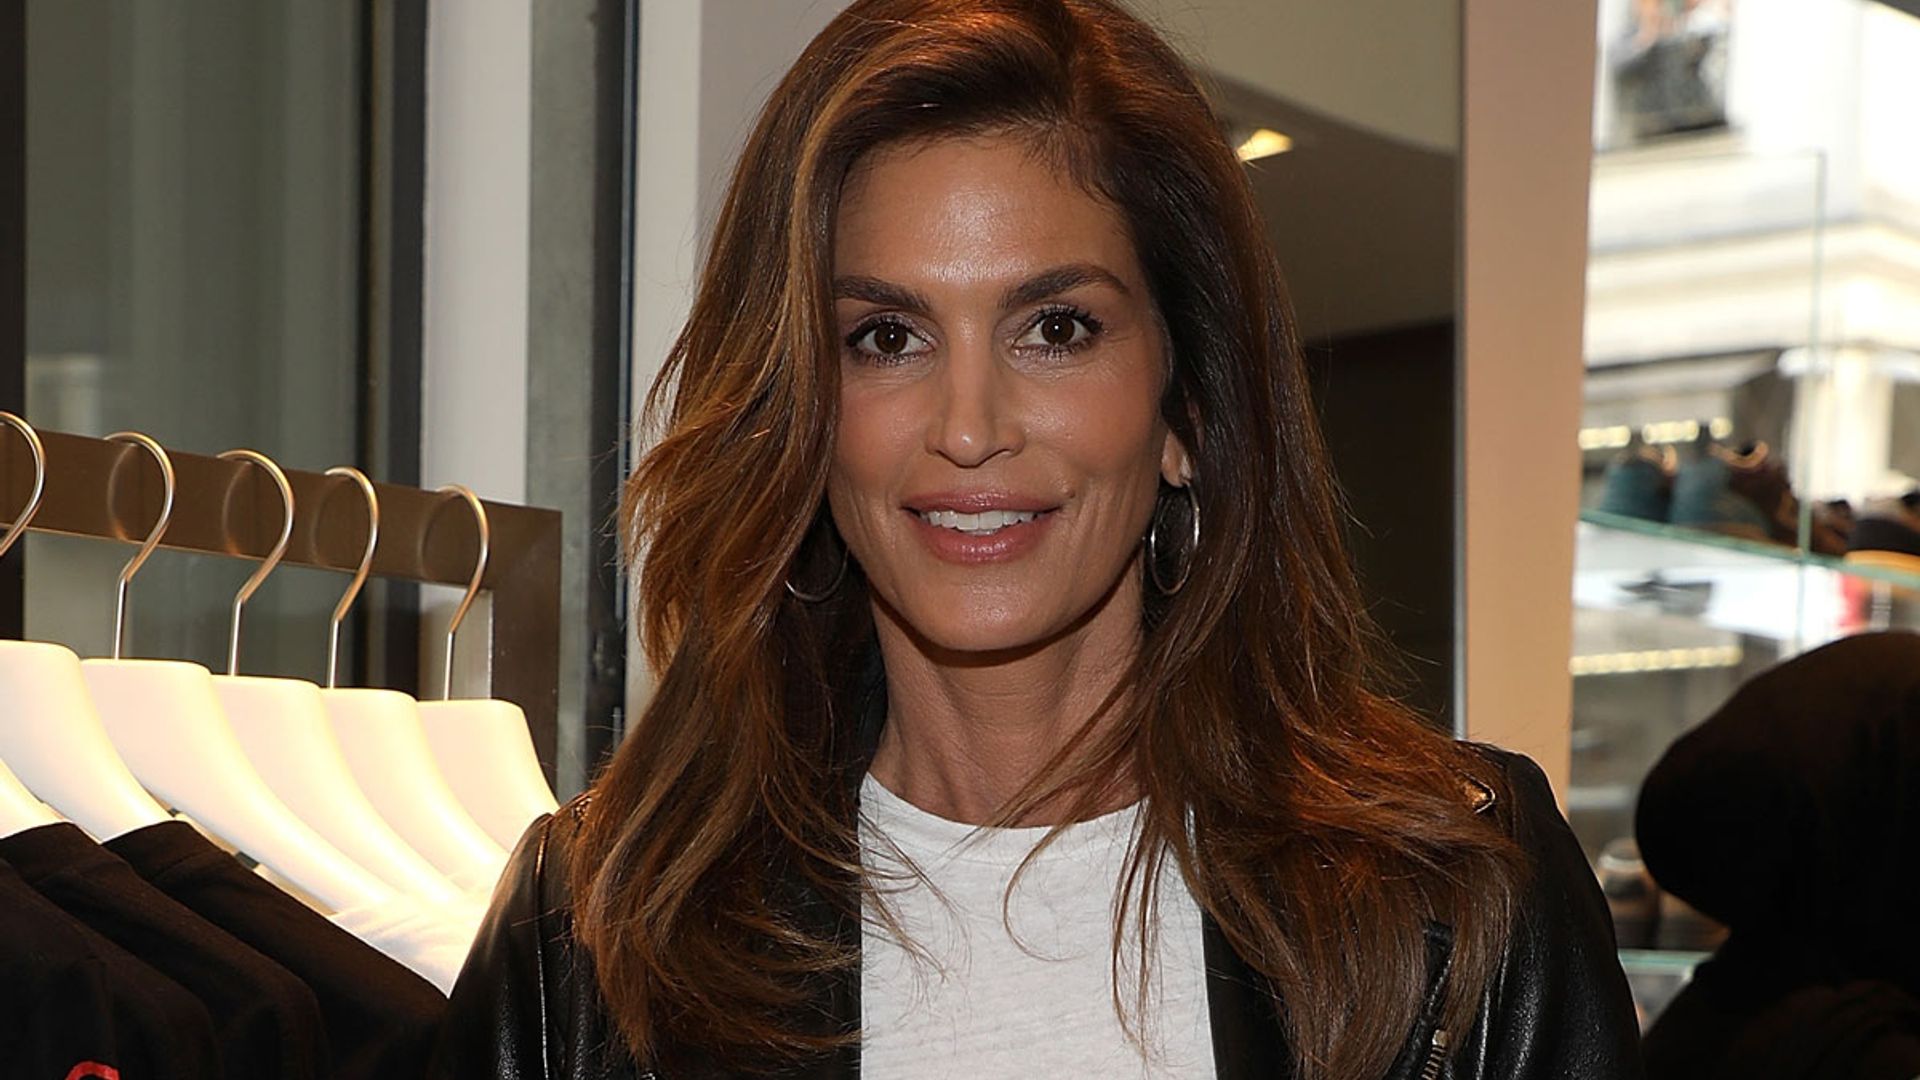 Cindy Crawford's dressing room inside $7.5million home is so unexpected